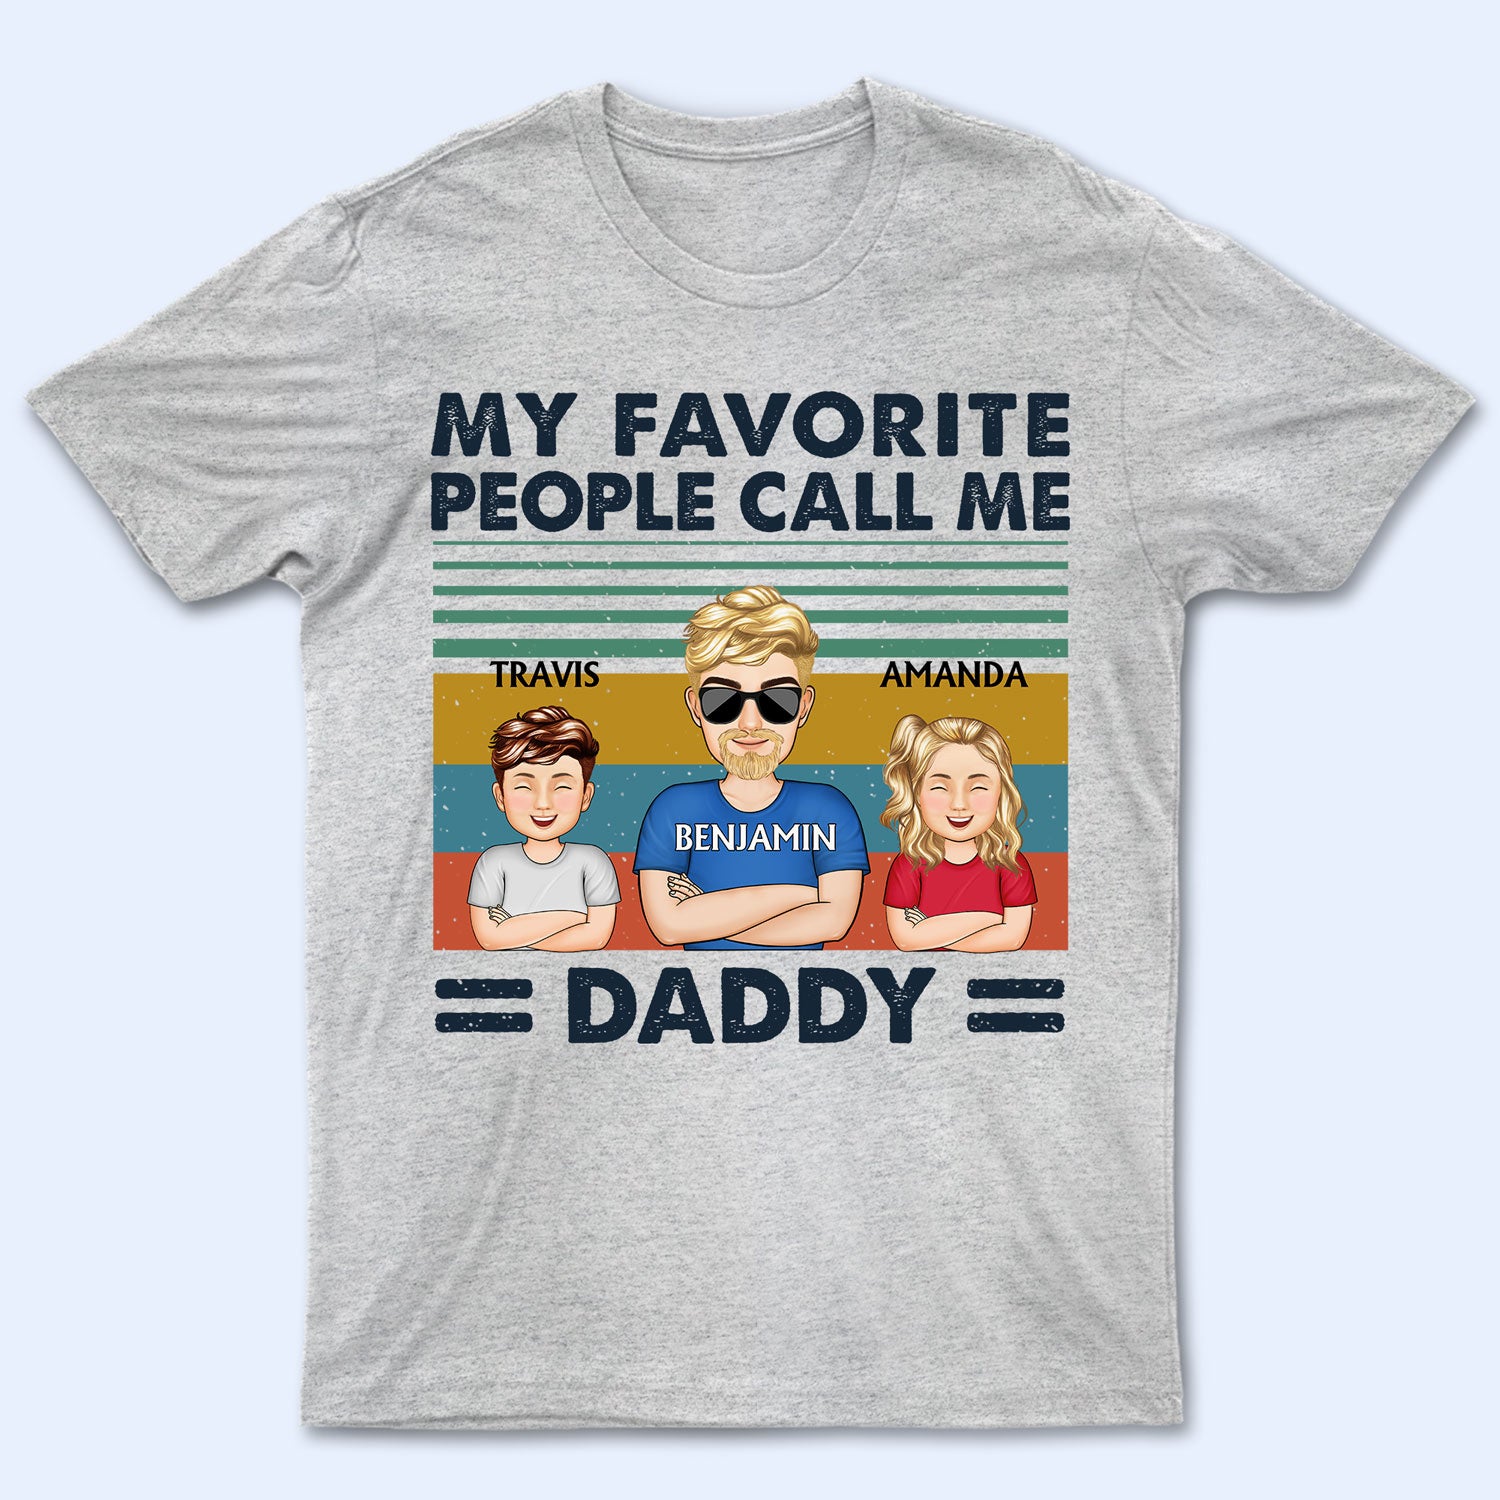 My Favorite People Call Me Dad Grandpa - Birthday, Loving Gift For Dad, Father, Grandpa - Personalized Custom T Shirt